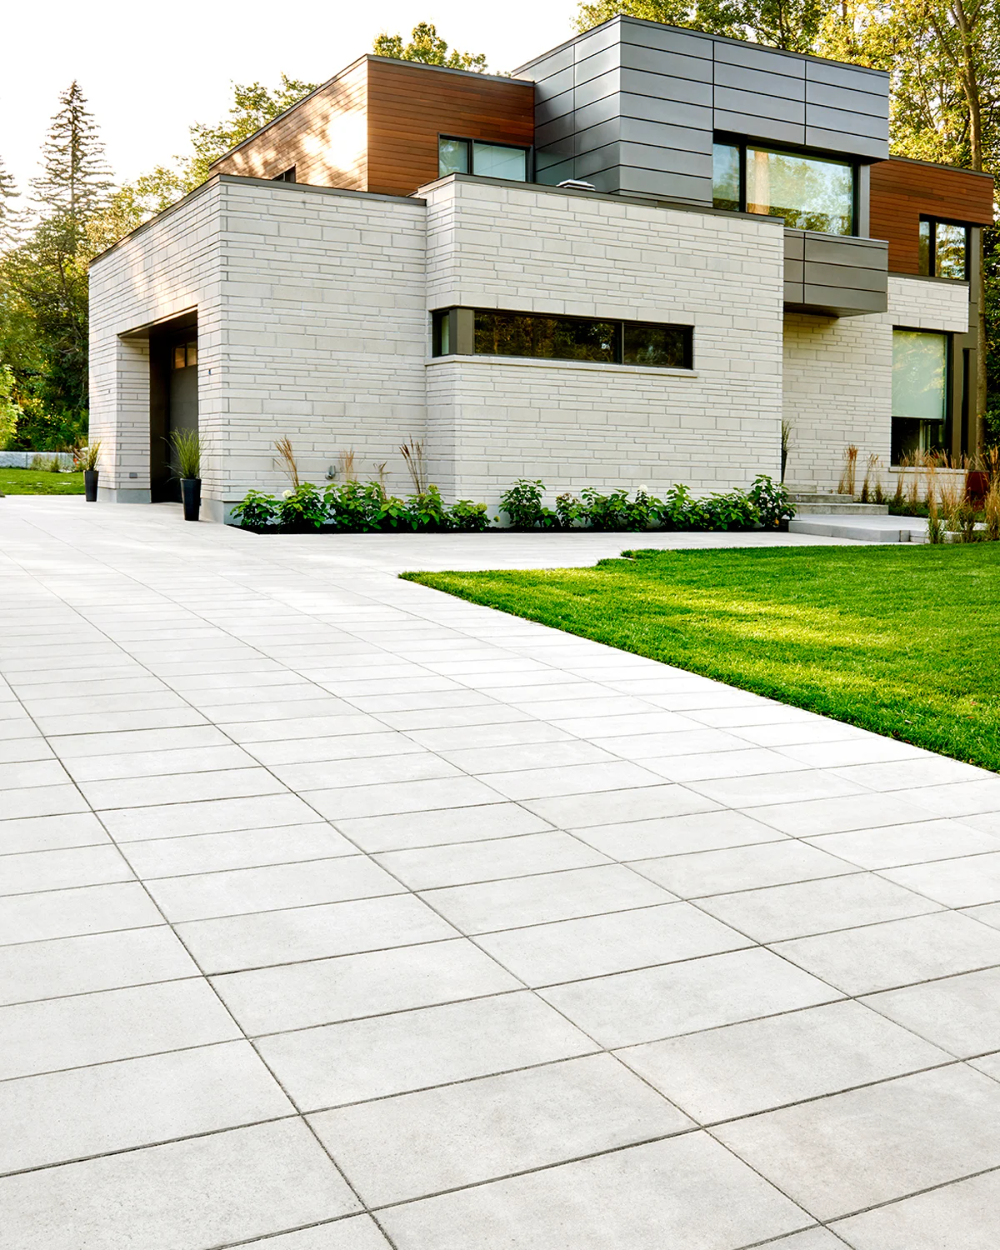 The Art of Crafting Unique Driveway Designs